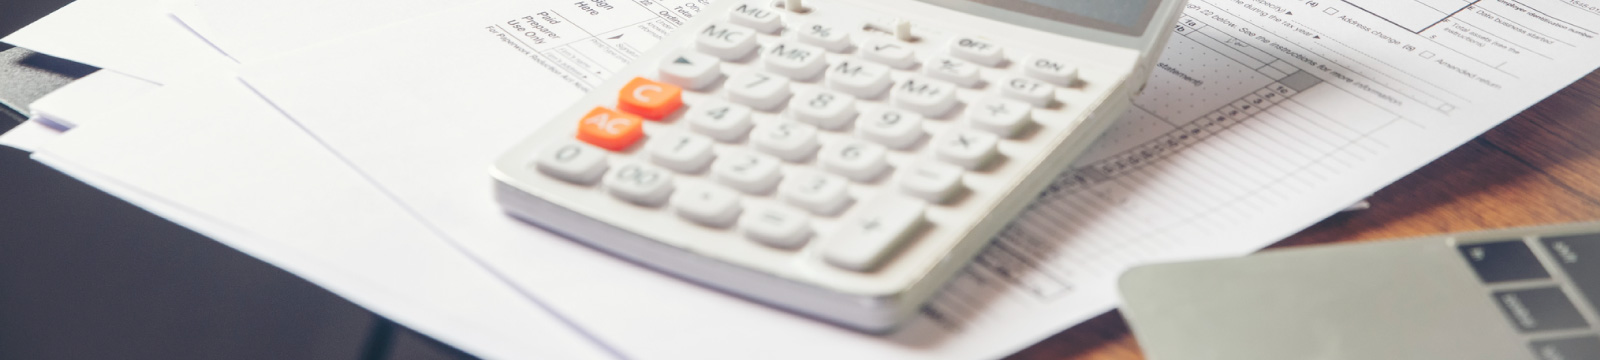 A calculator on a desk with papers